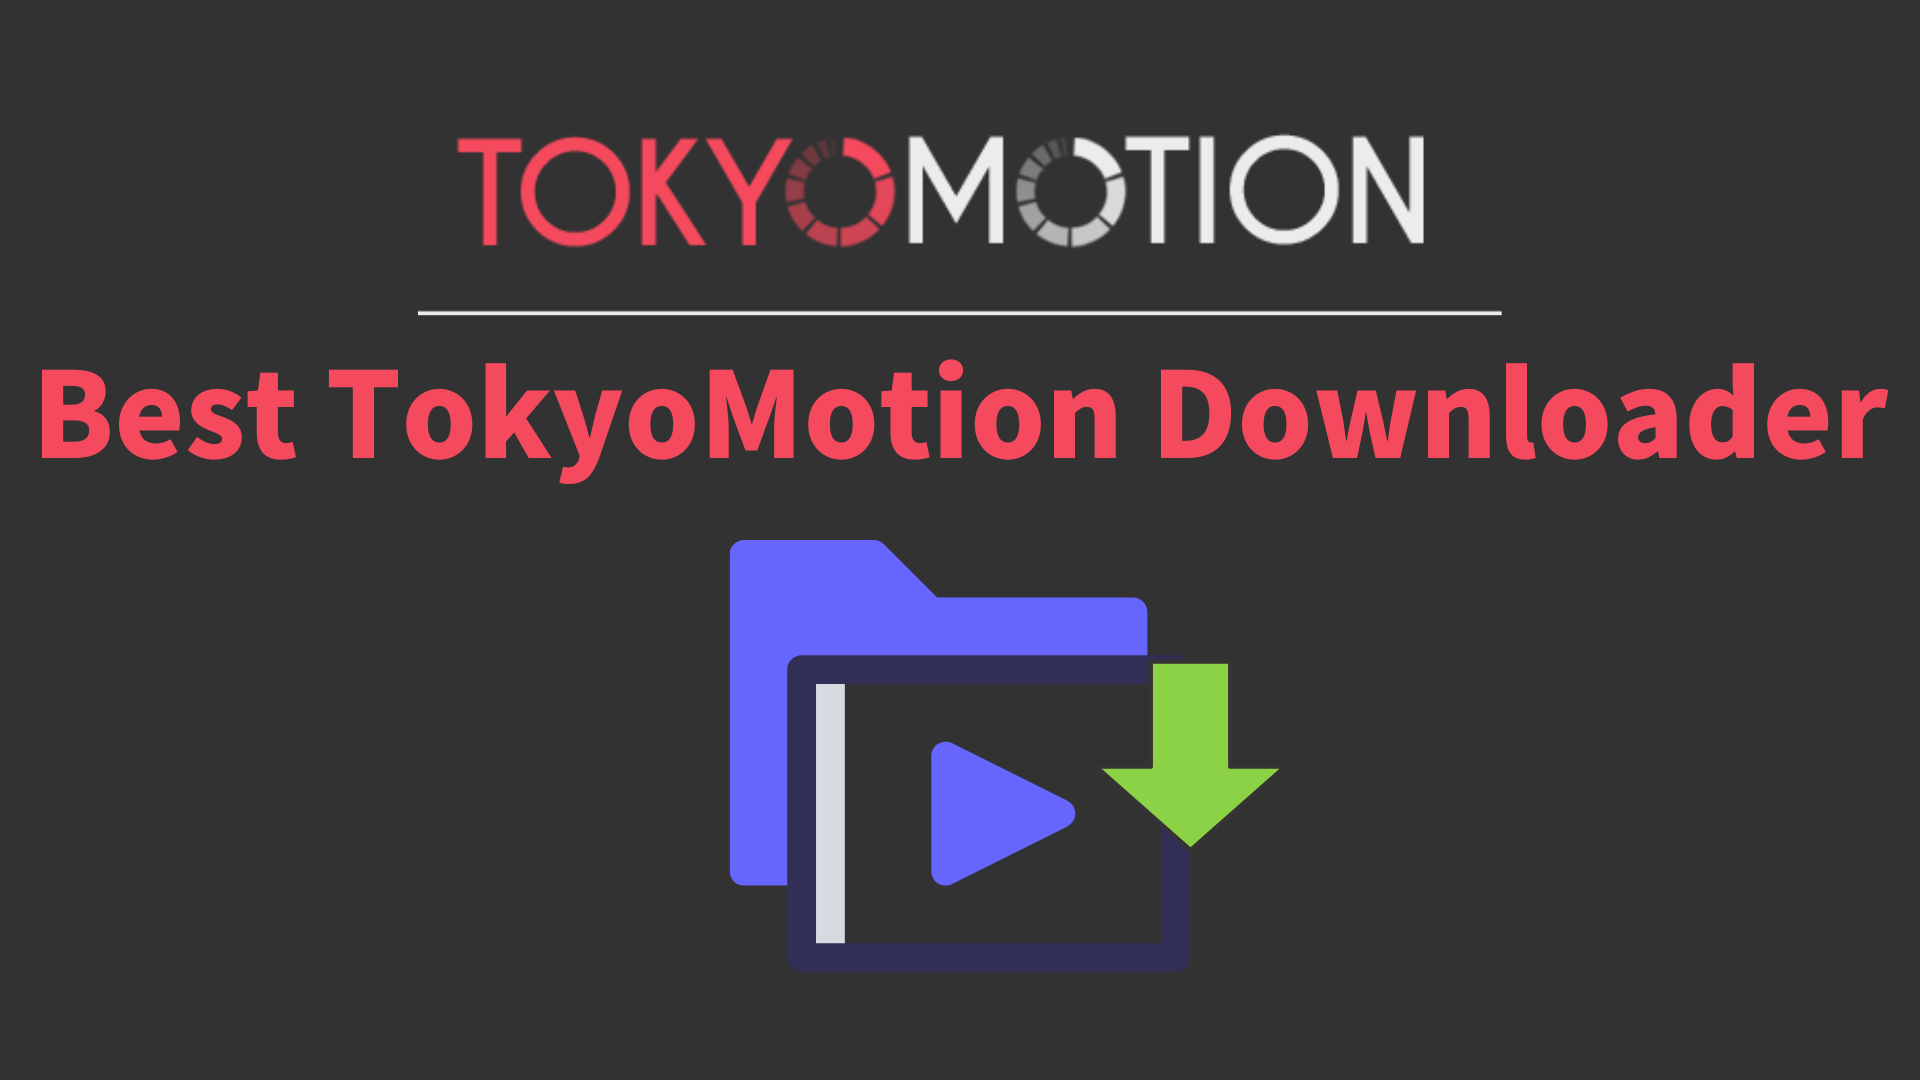 Tokyo moion